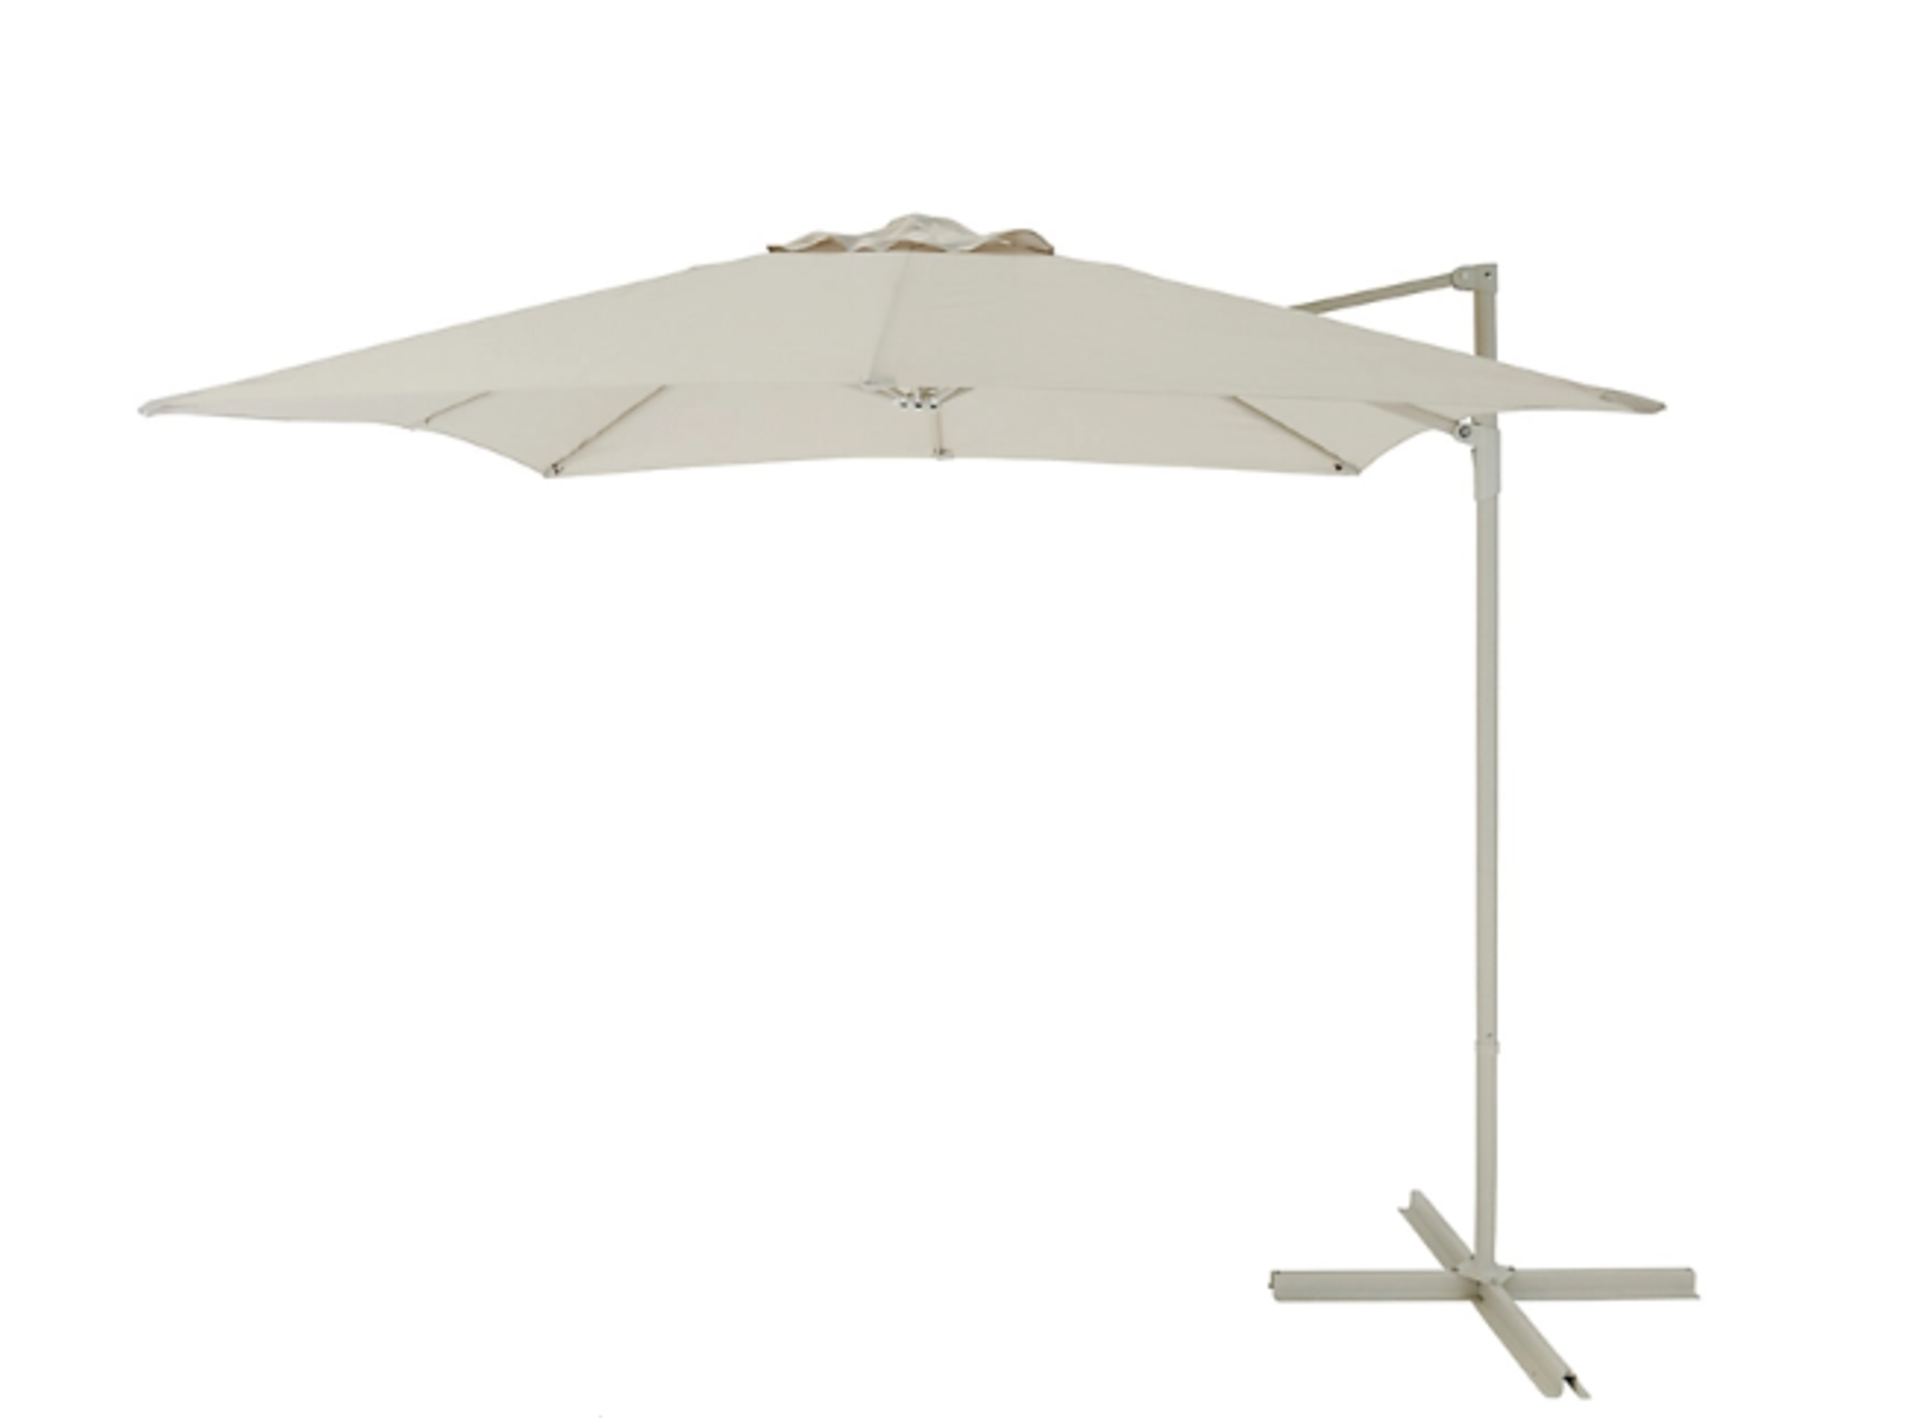 TRADE LOT 4 x New & Boxed Luxury 2.5m Sand Overhanging Parasols - Sand. This square overhanging - Image 3 of 8